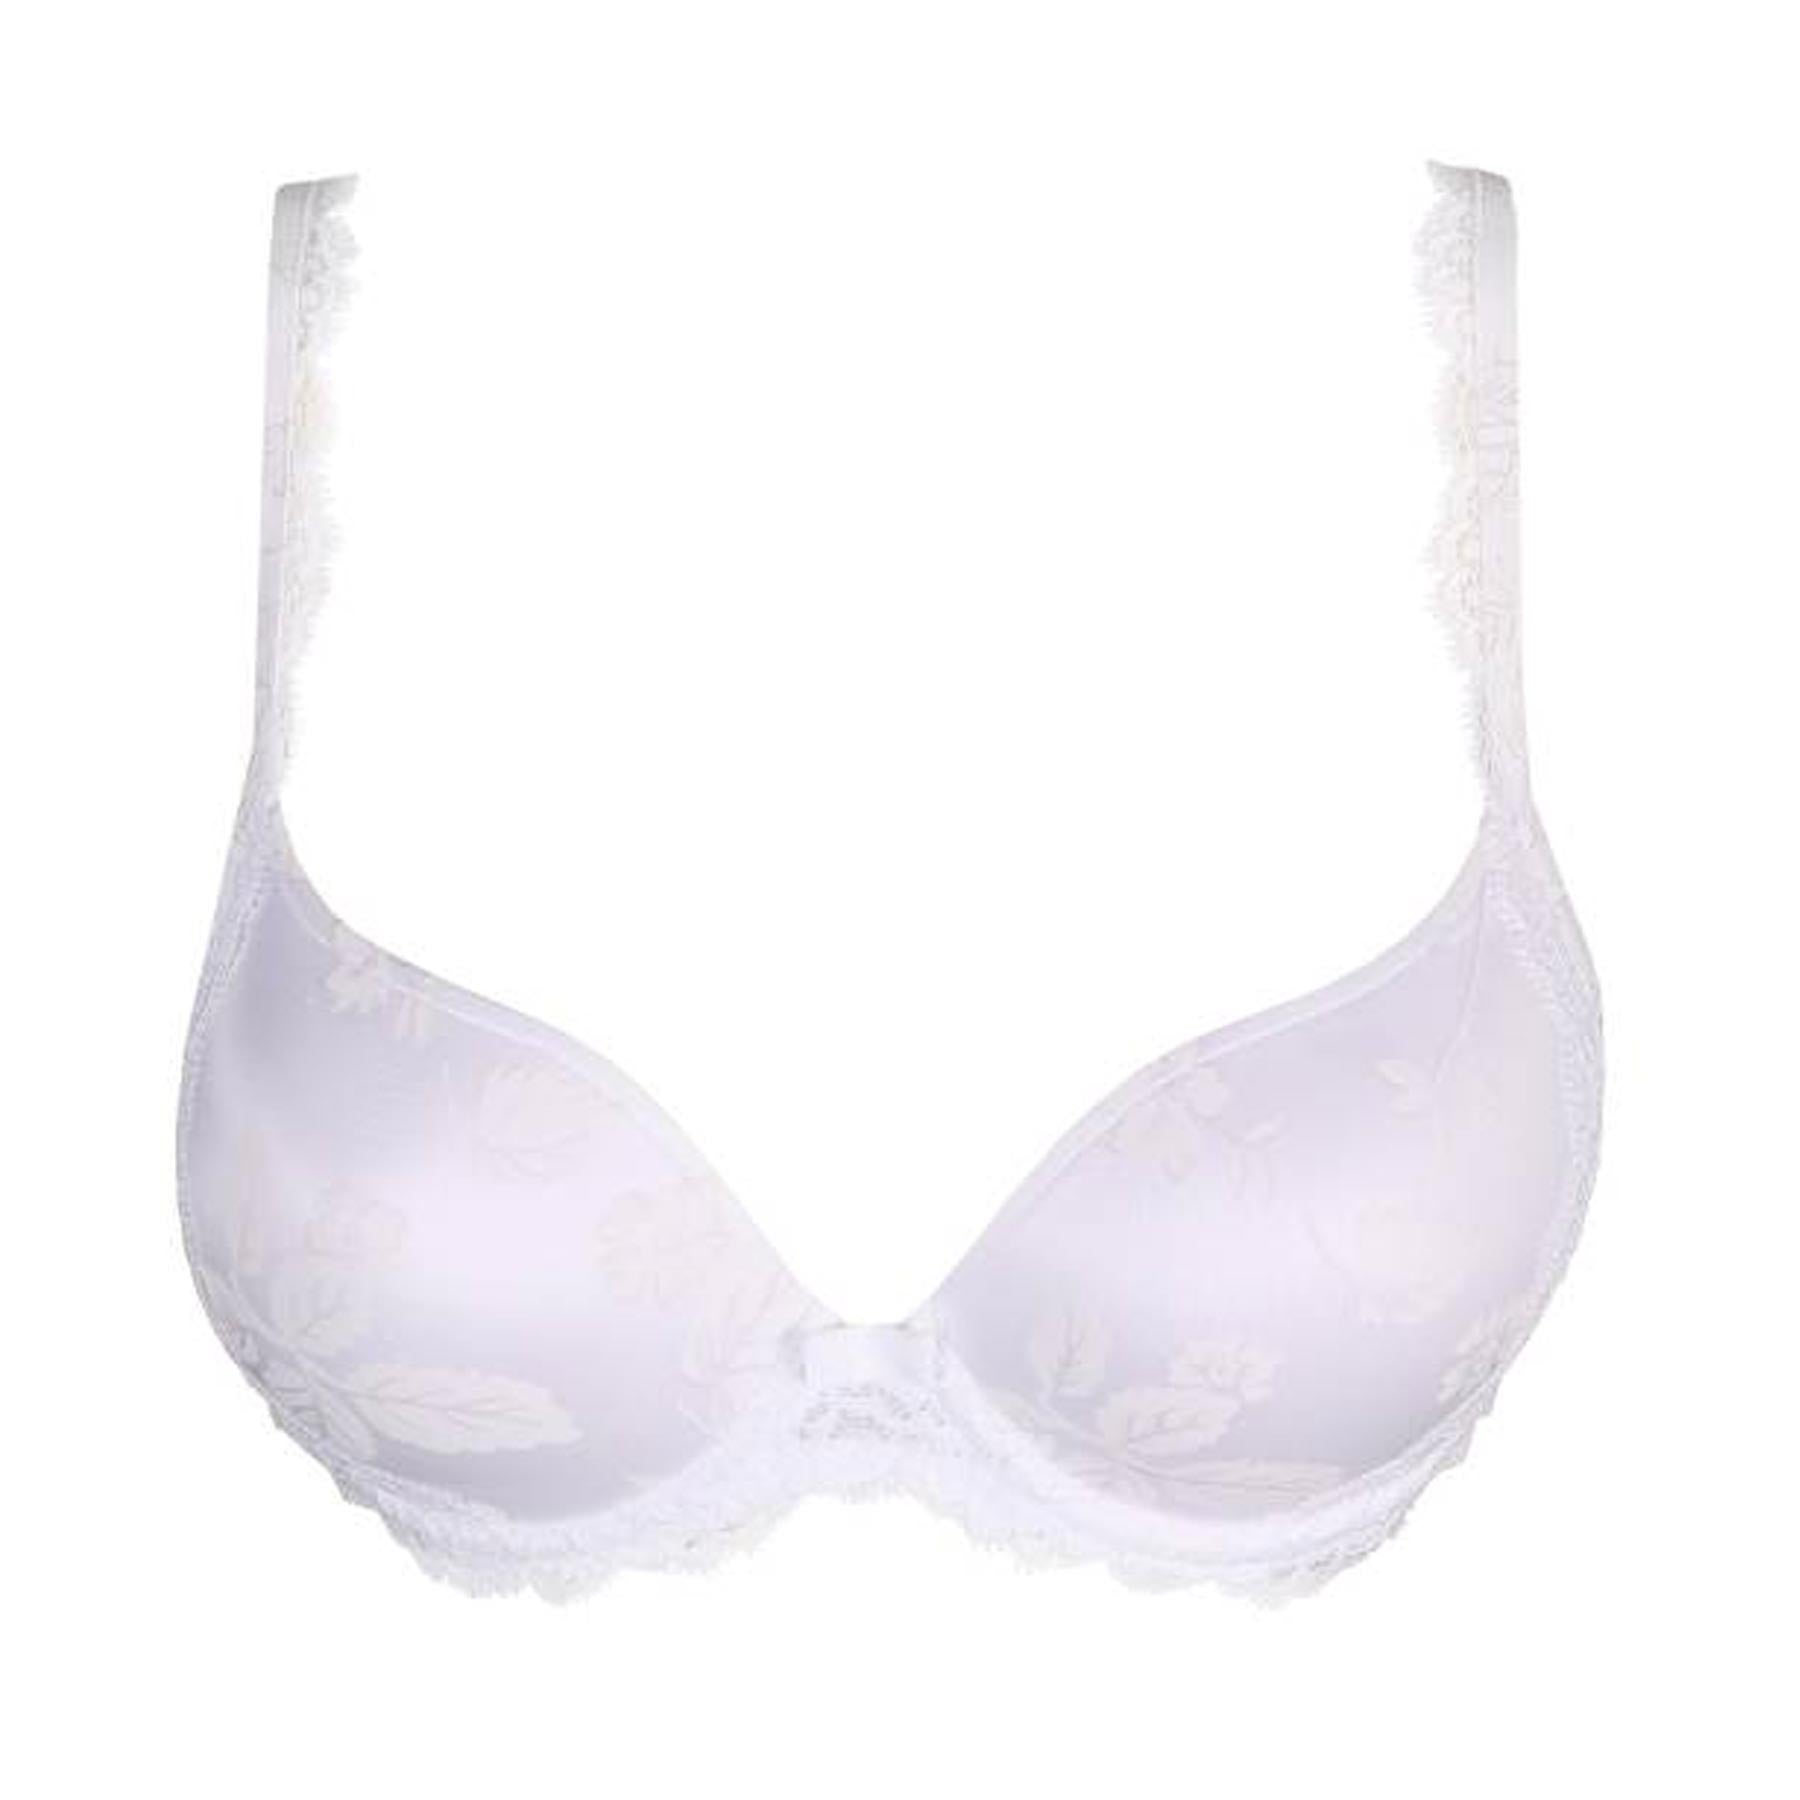 Exquisite” White Lace Plunge Pushup Bra Sexy Thong Set - StyleOFF